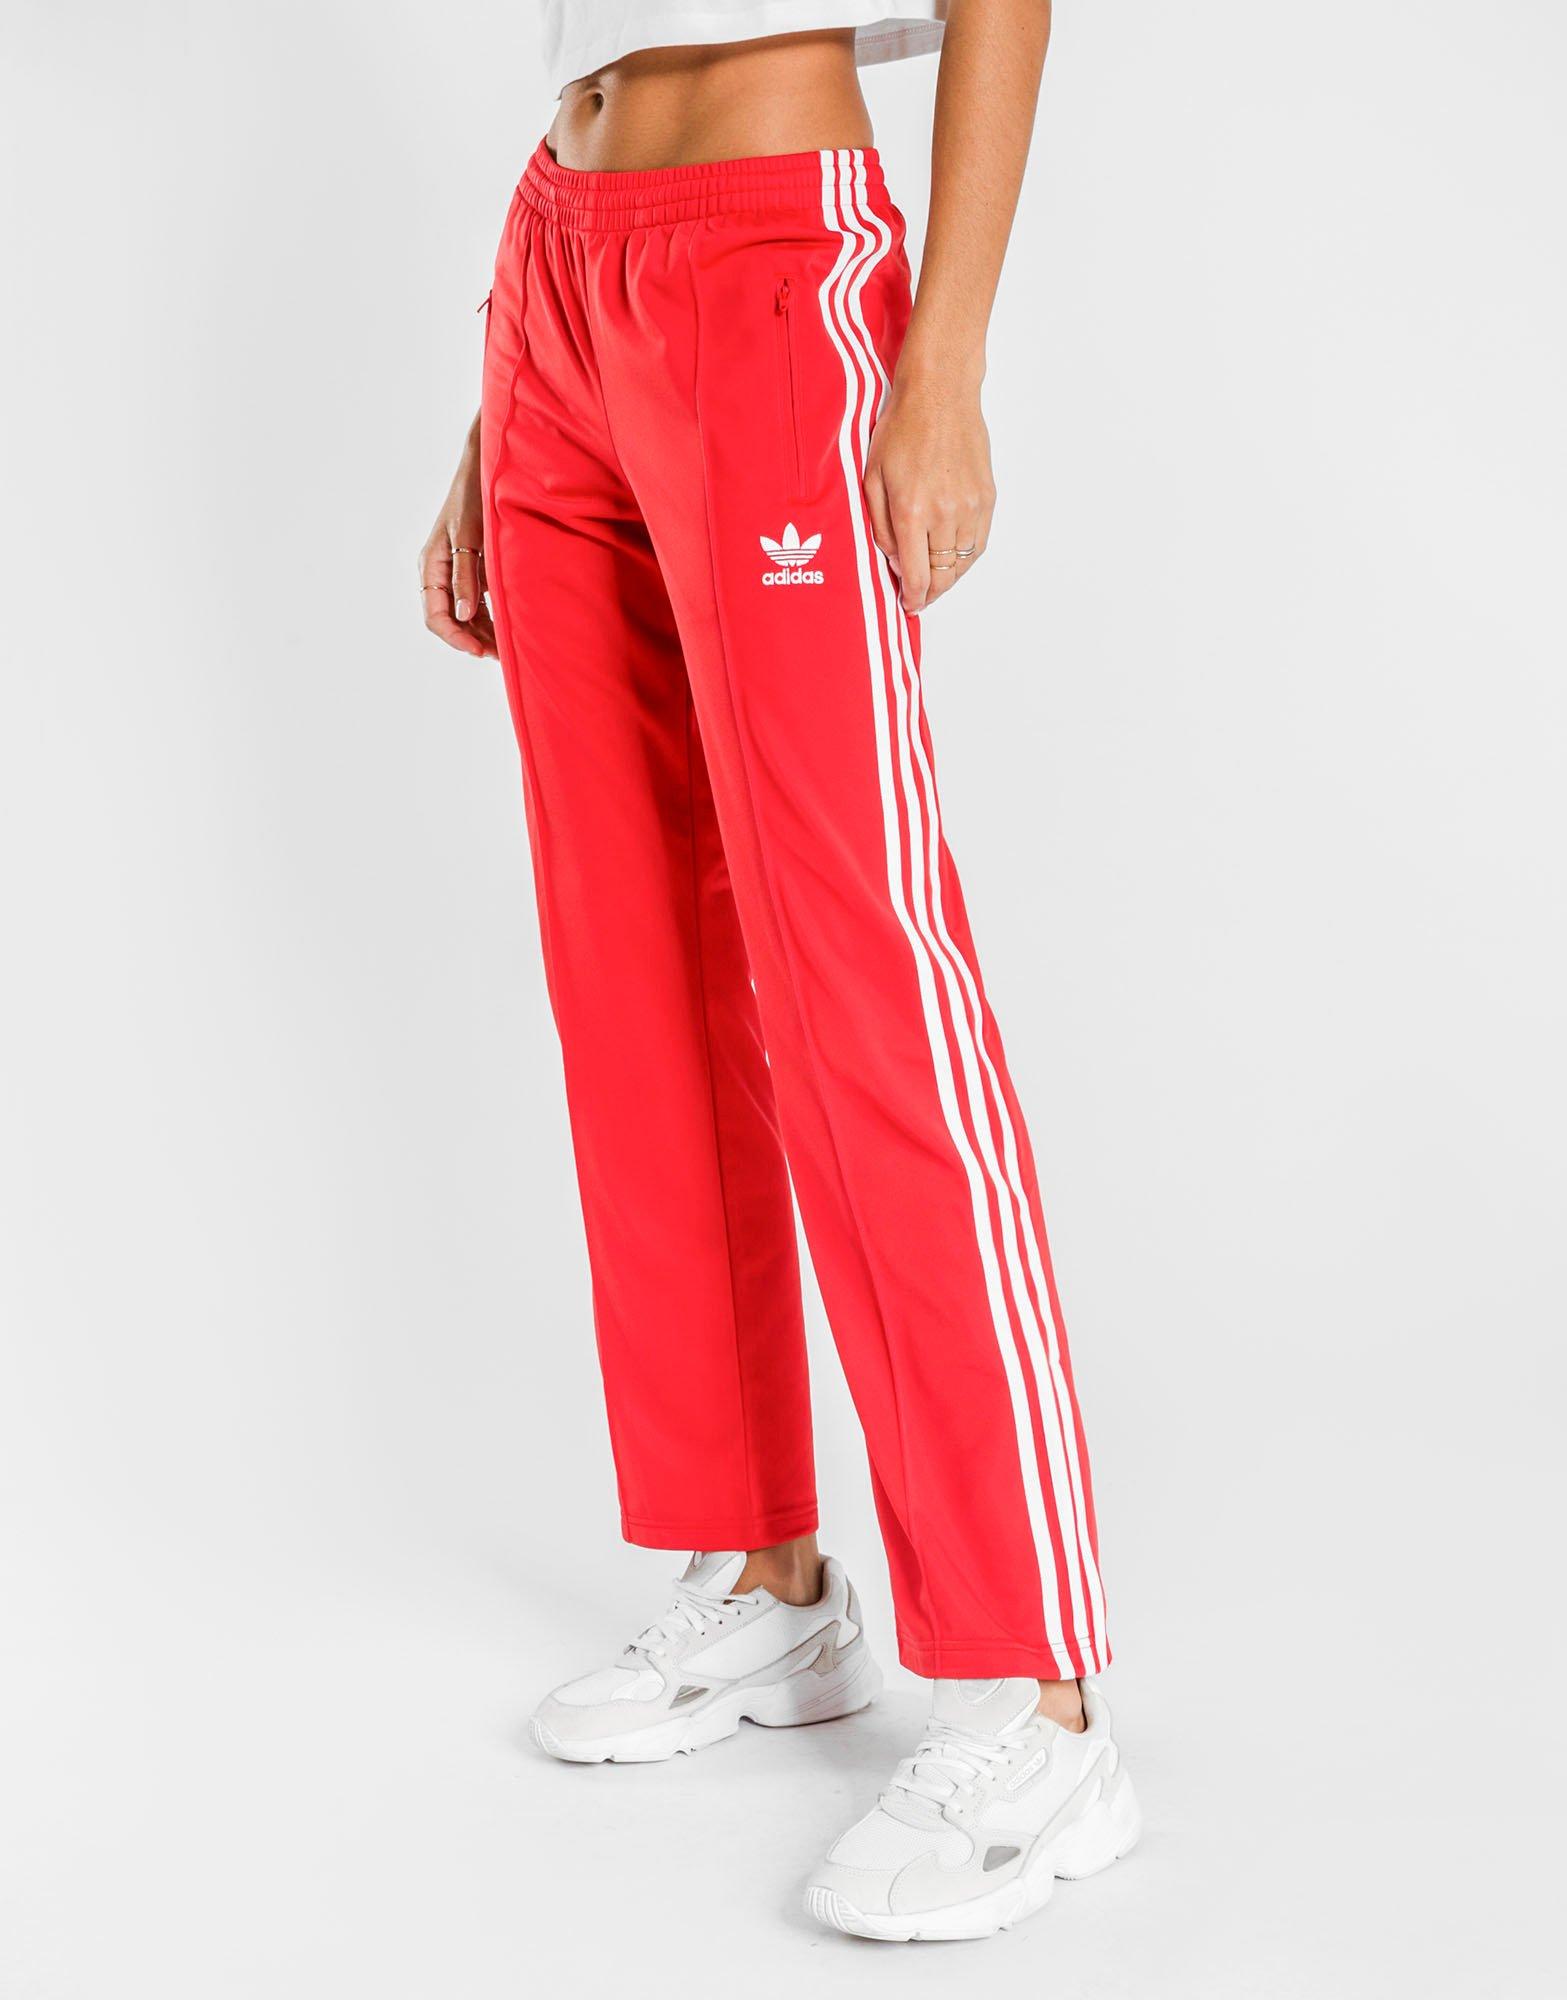 womens red tracksuit bottoms